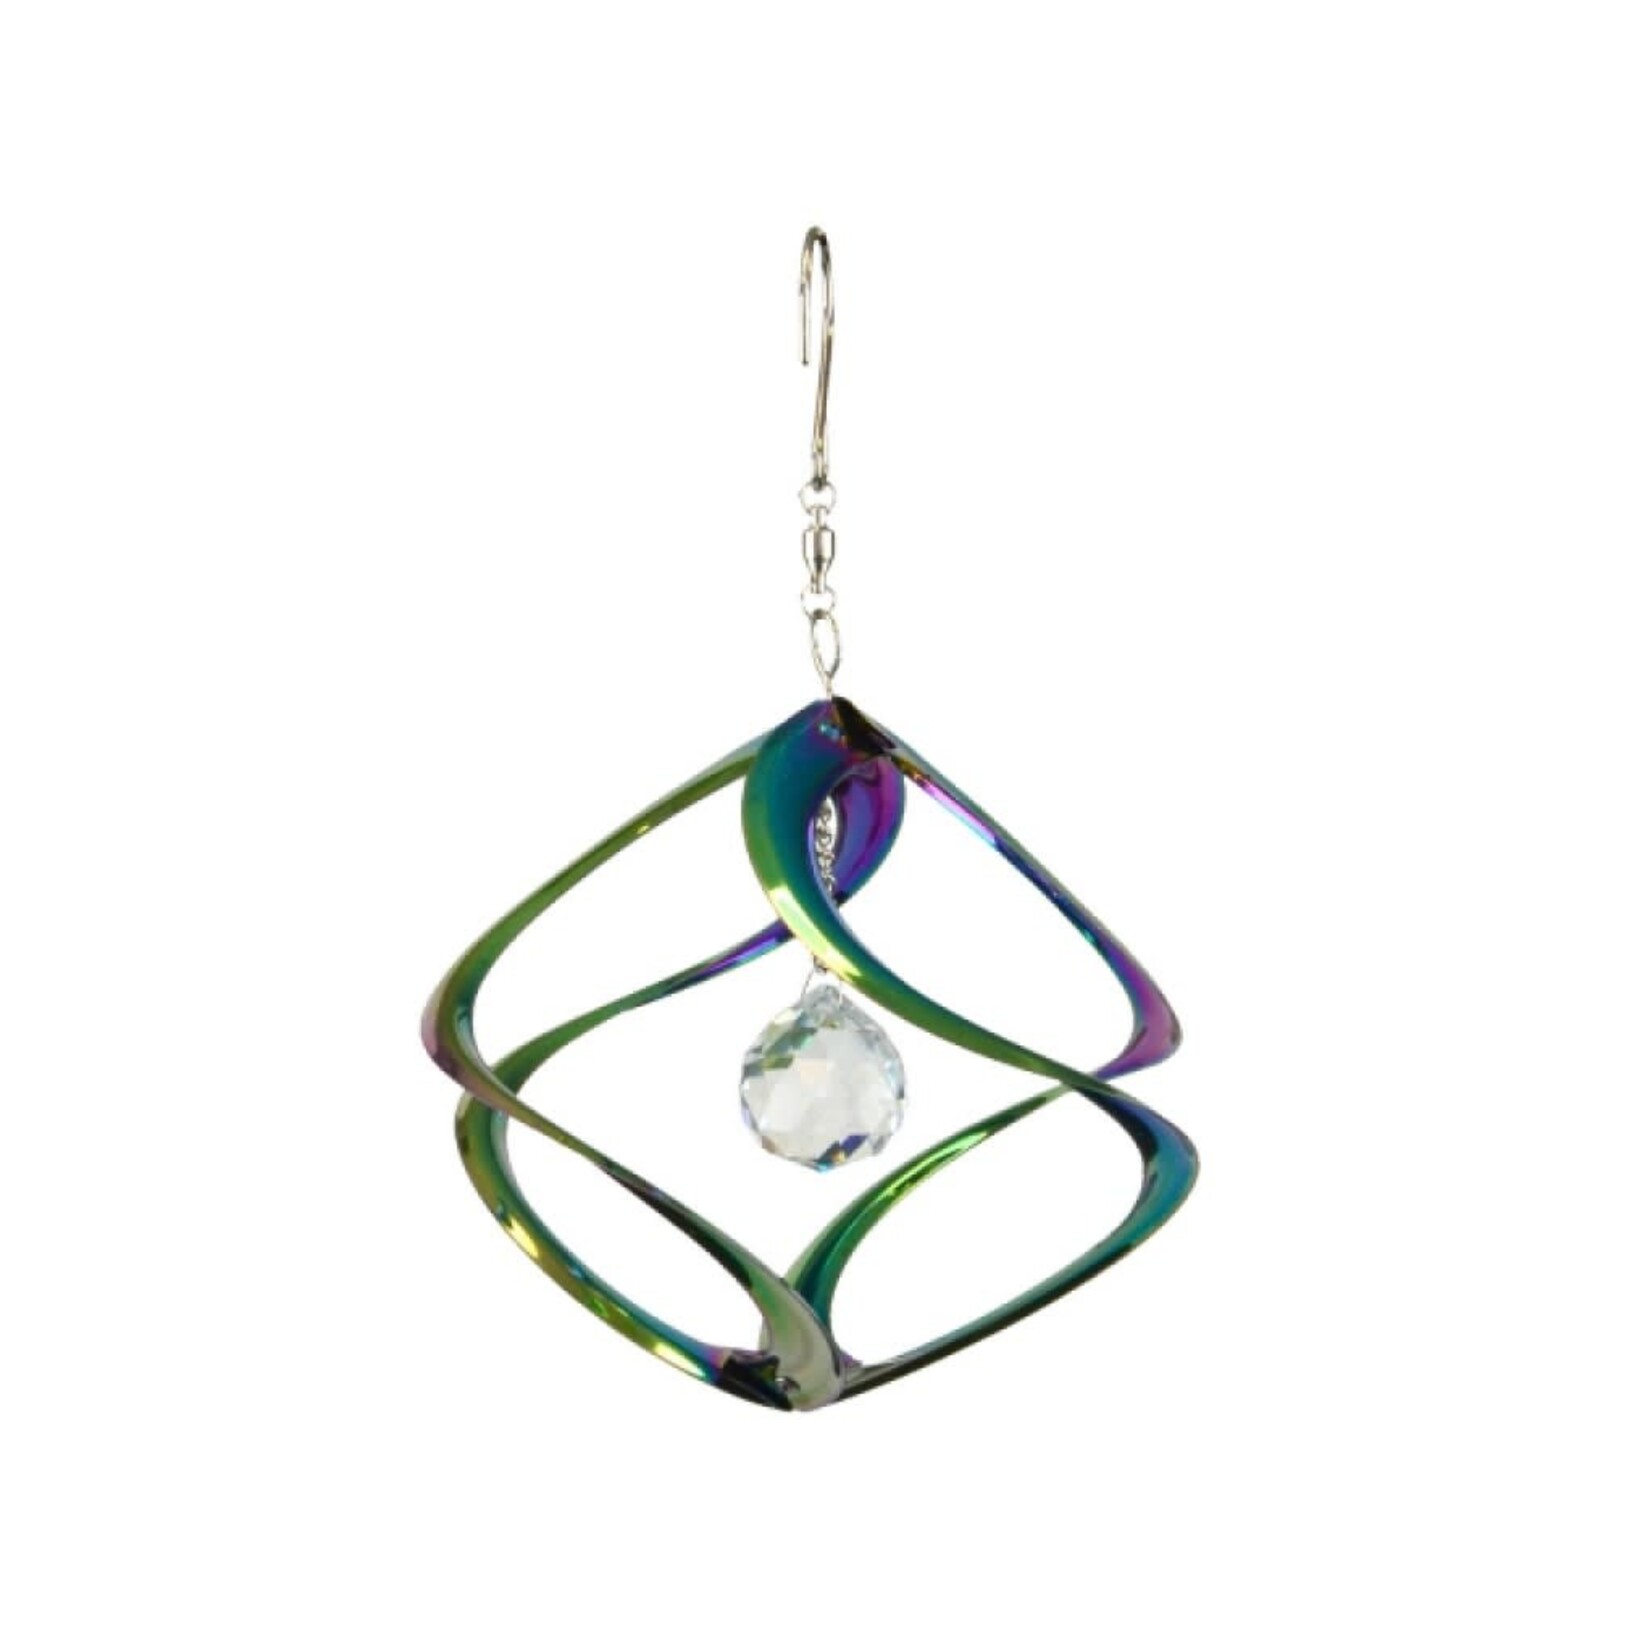 Hanging Helix - 11 Inch Rainbow with Crystal